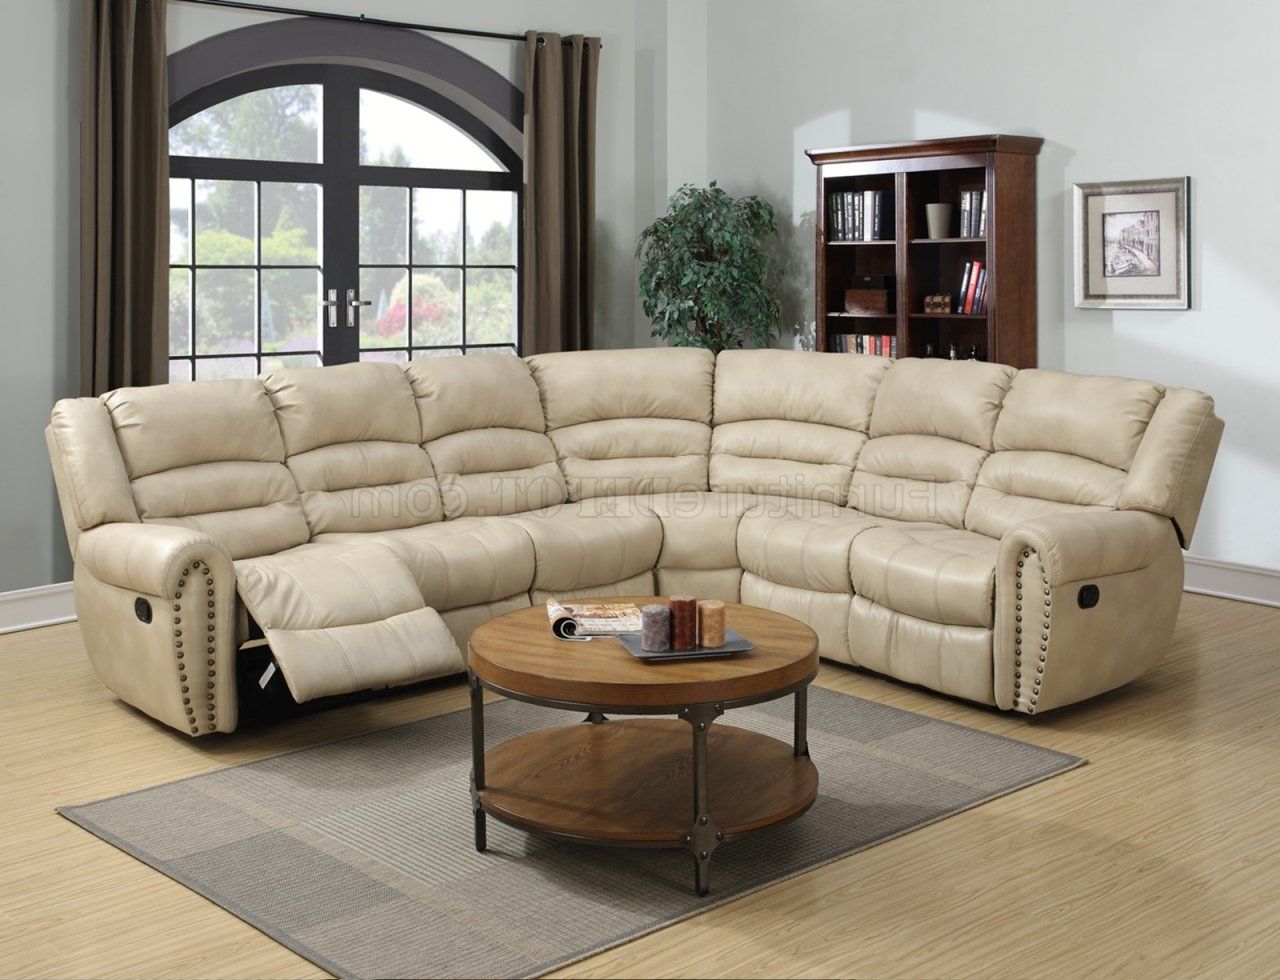 Most Recently Released Small L Shaped Sectional Sofas In Beige Within G687 Motion Sectional Sofa In Beige Bonded Leatherglory (View 7 of 15)